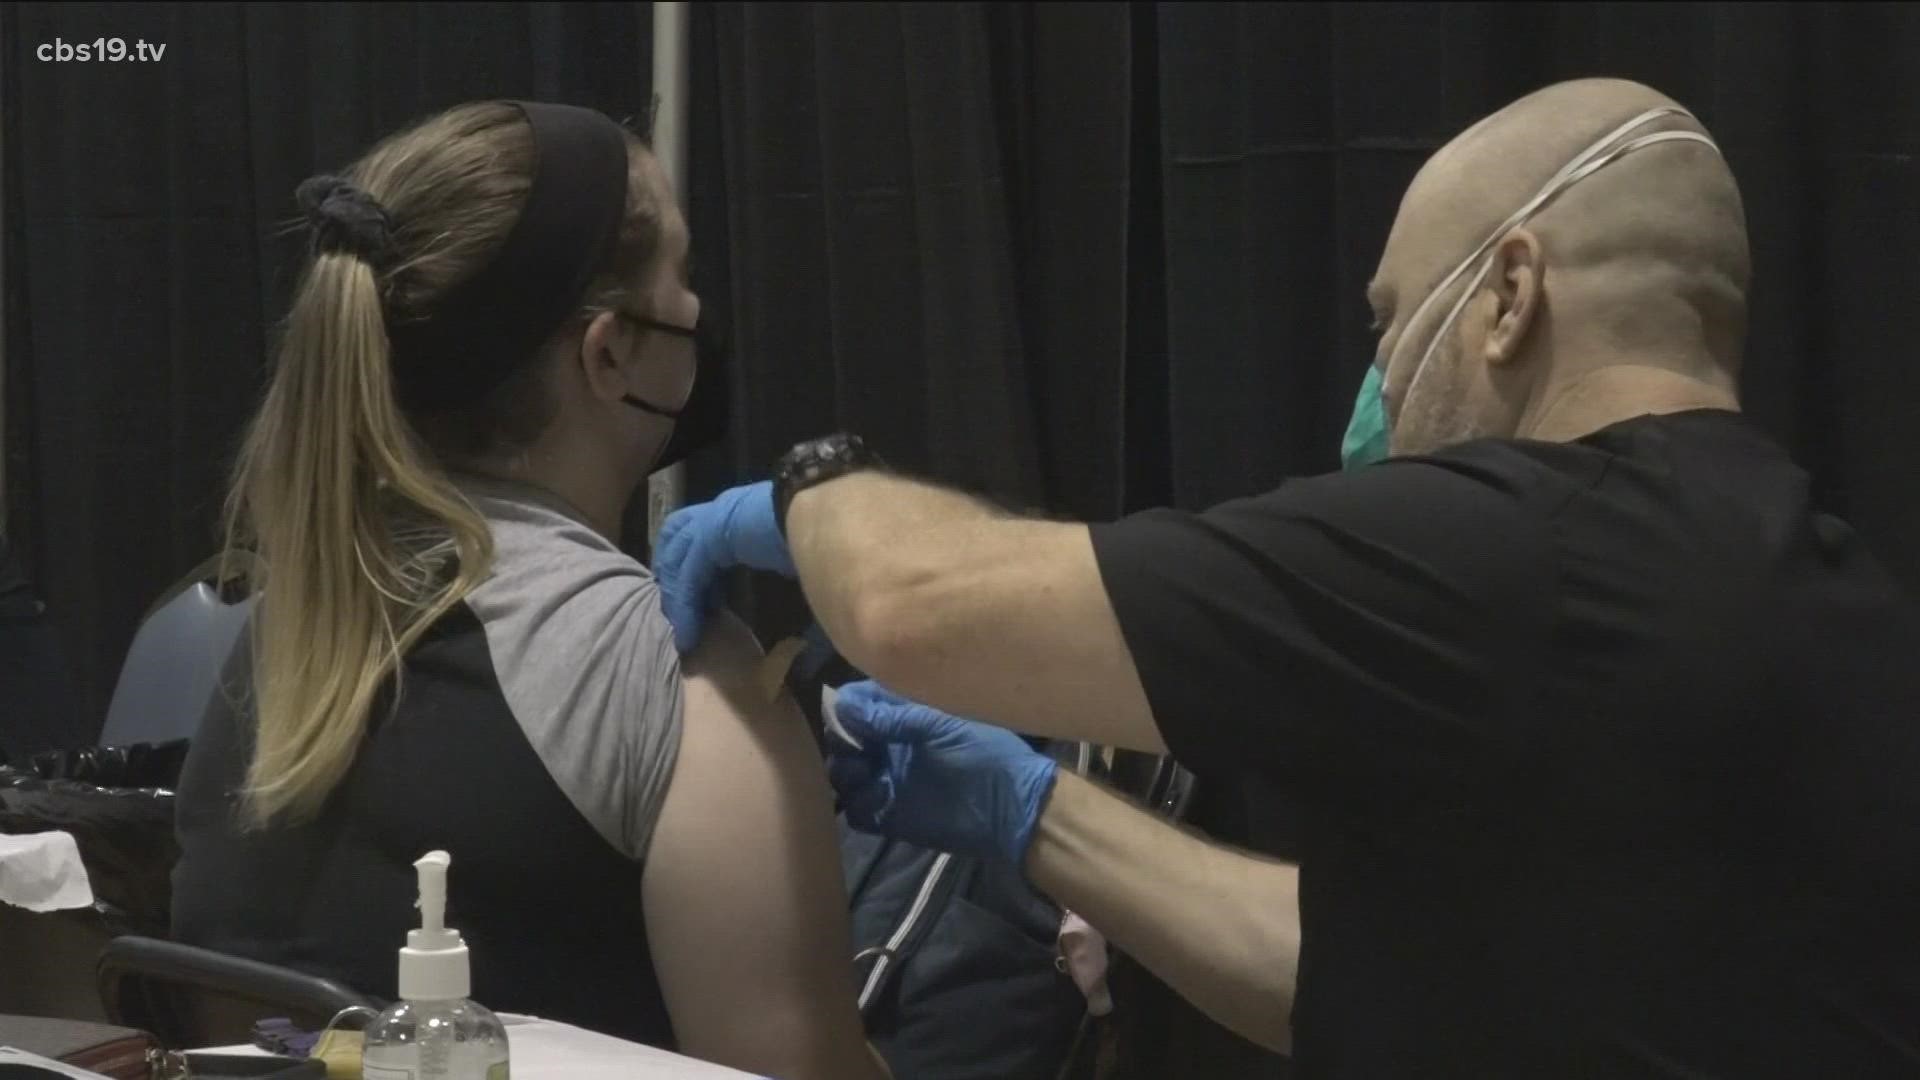 Jarvis Christian College hosted its third vaccine clinic in hopes of raising its 33 percent rate of students who are vaccinated.